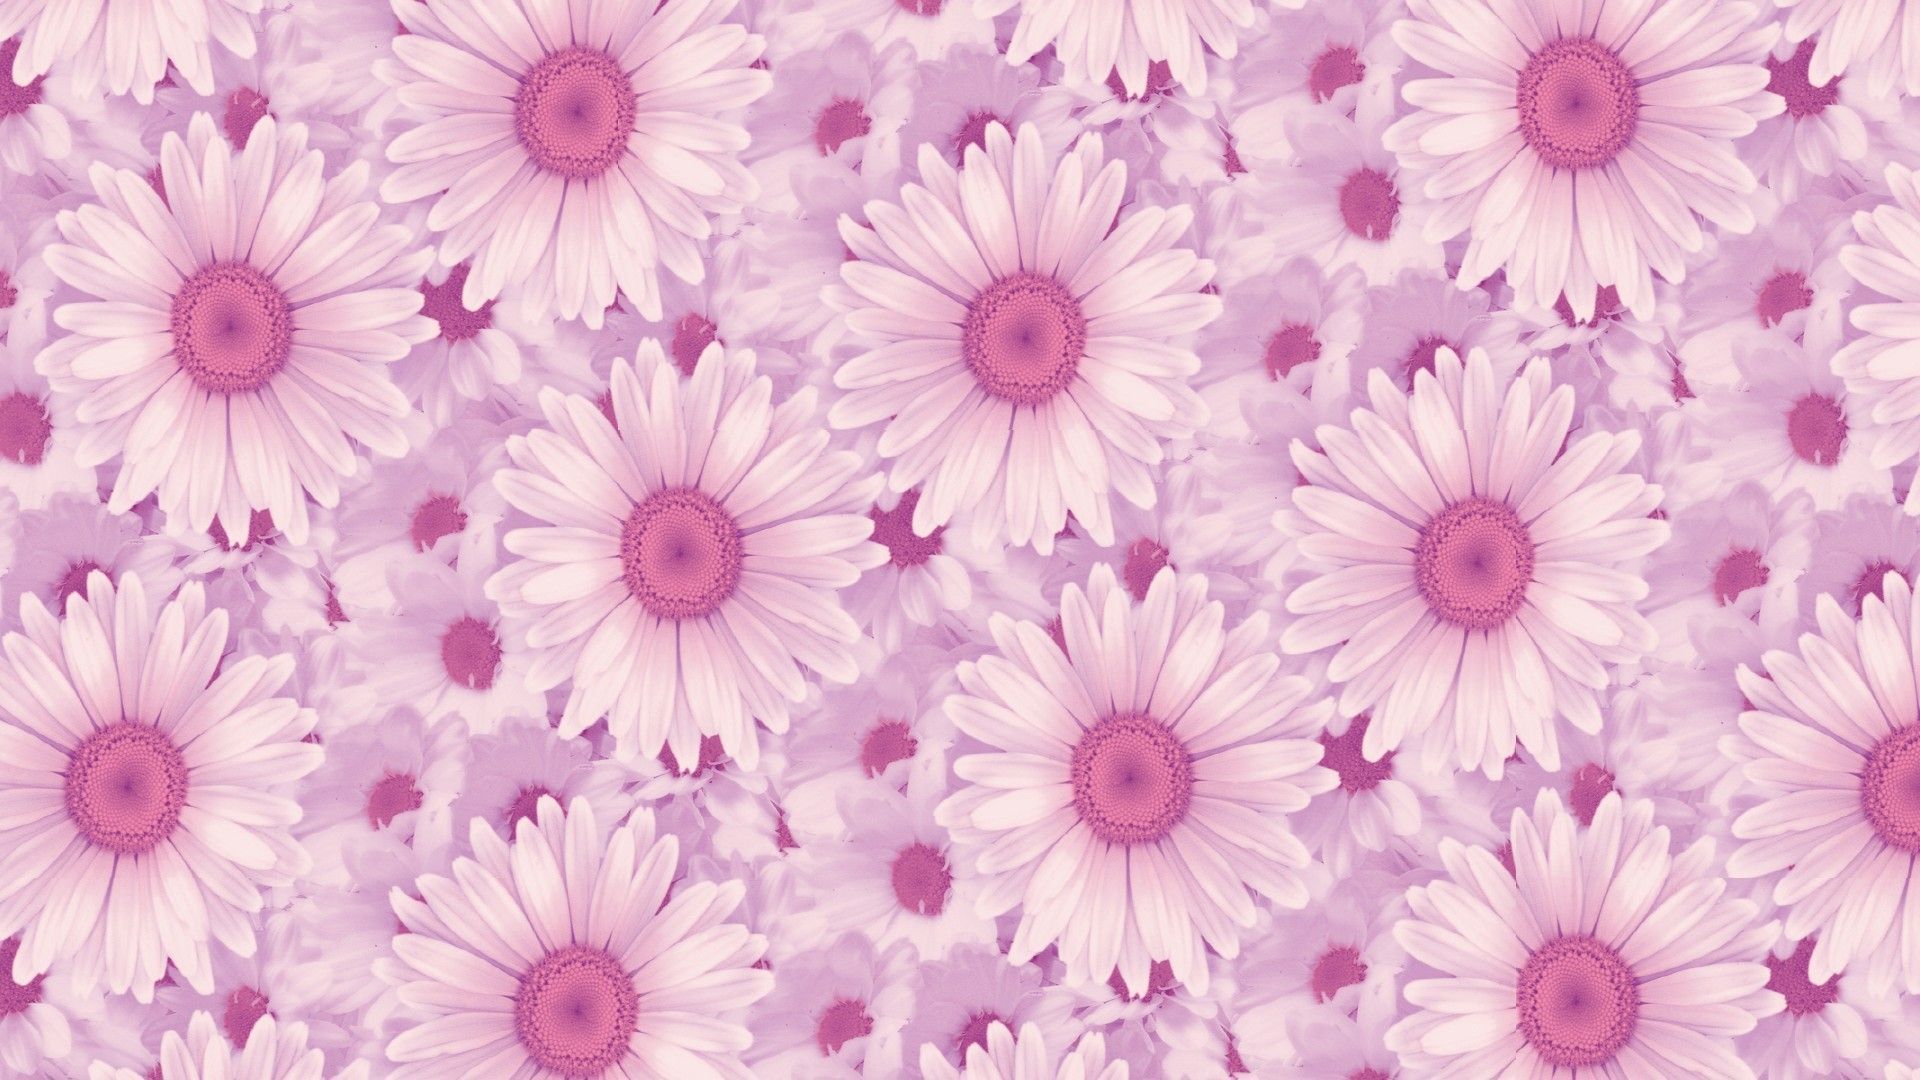 Free download Related Picture Daisies Background Wallpaper Picture Photo [1920x1080] for your Desktop, Mobile & Tablet. Explore Pink Daisy Desktop Wallpaper. Daisy Wallpaper, Gerbera Daisy Wallpaper, Gerber Daisy Wallpaper